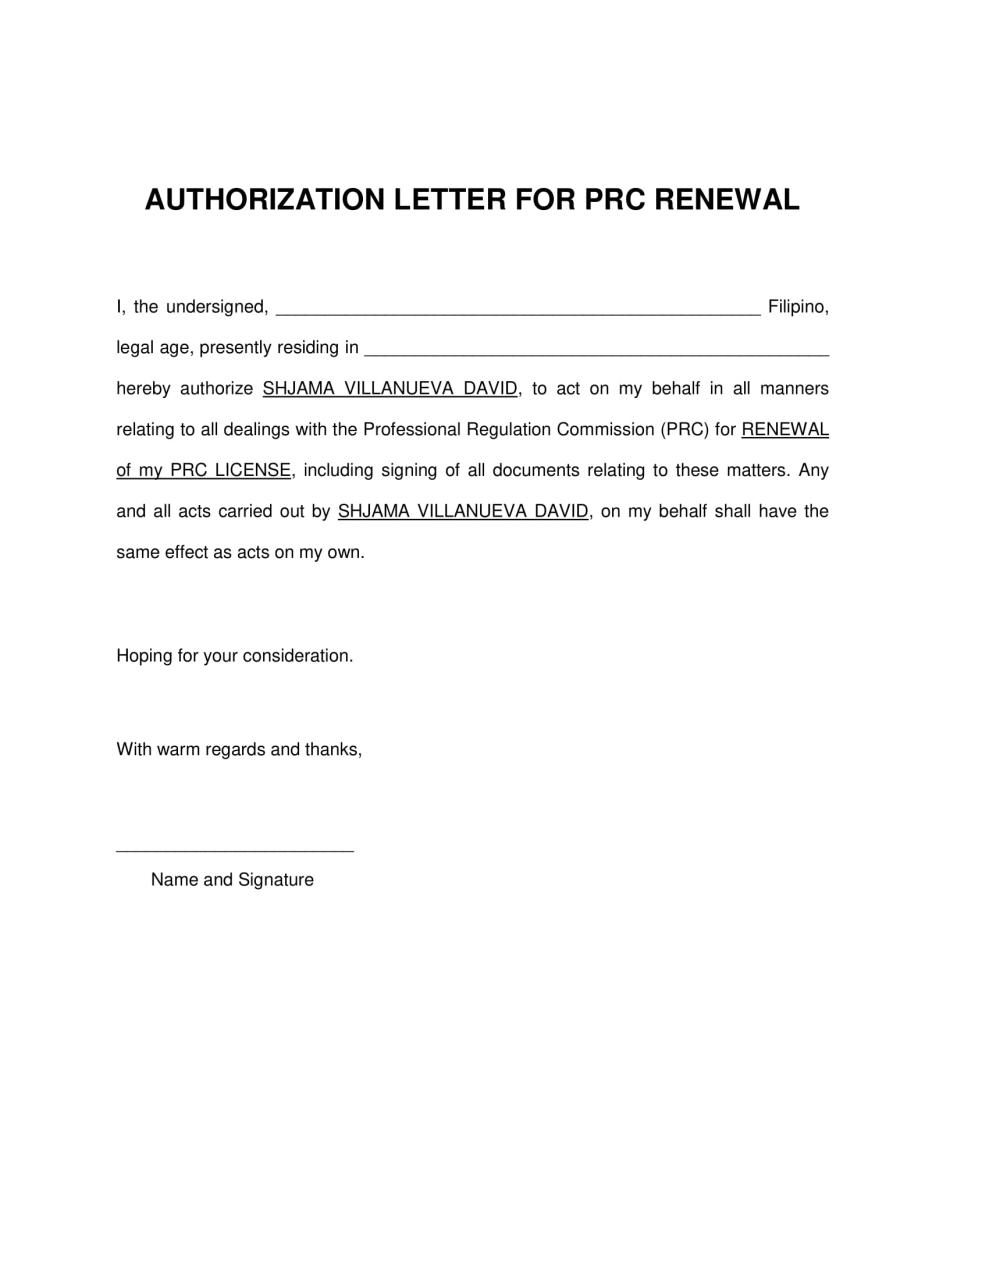 Authorization Letter To Act On Behalf - 11+ Examples, Format, Sample |  Examples